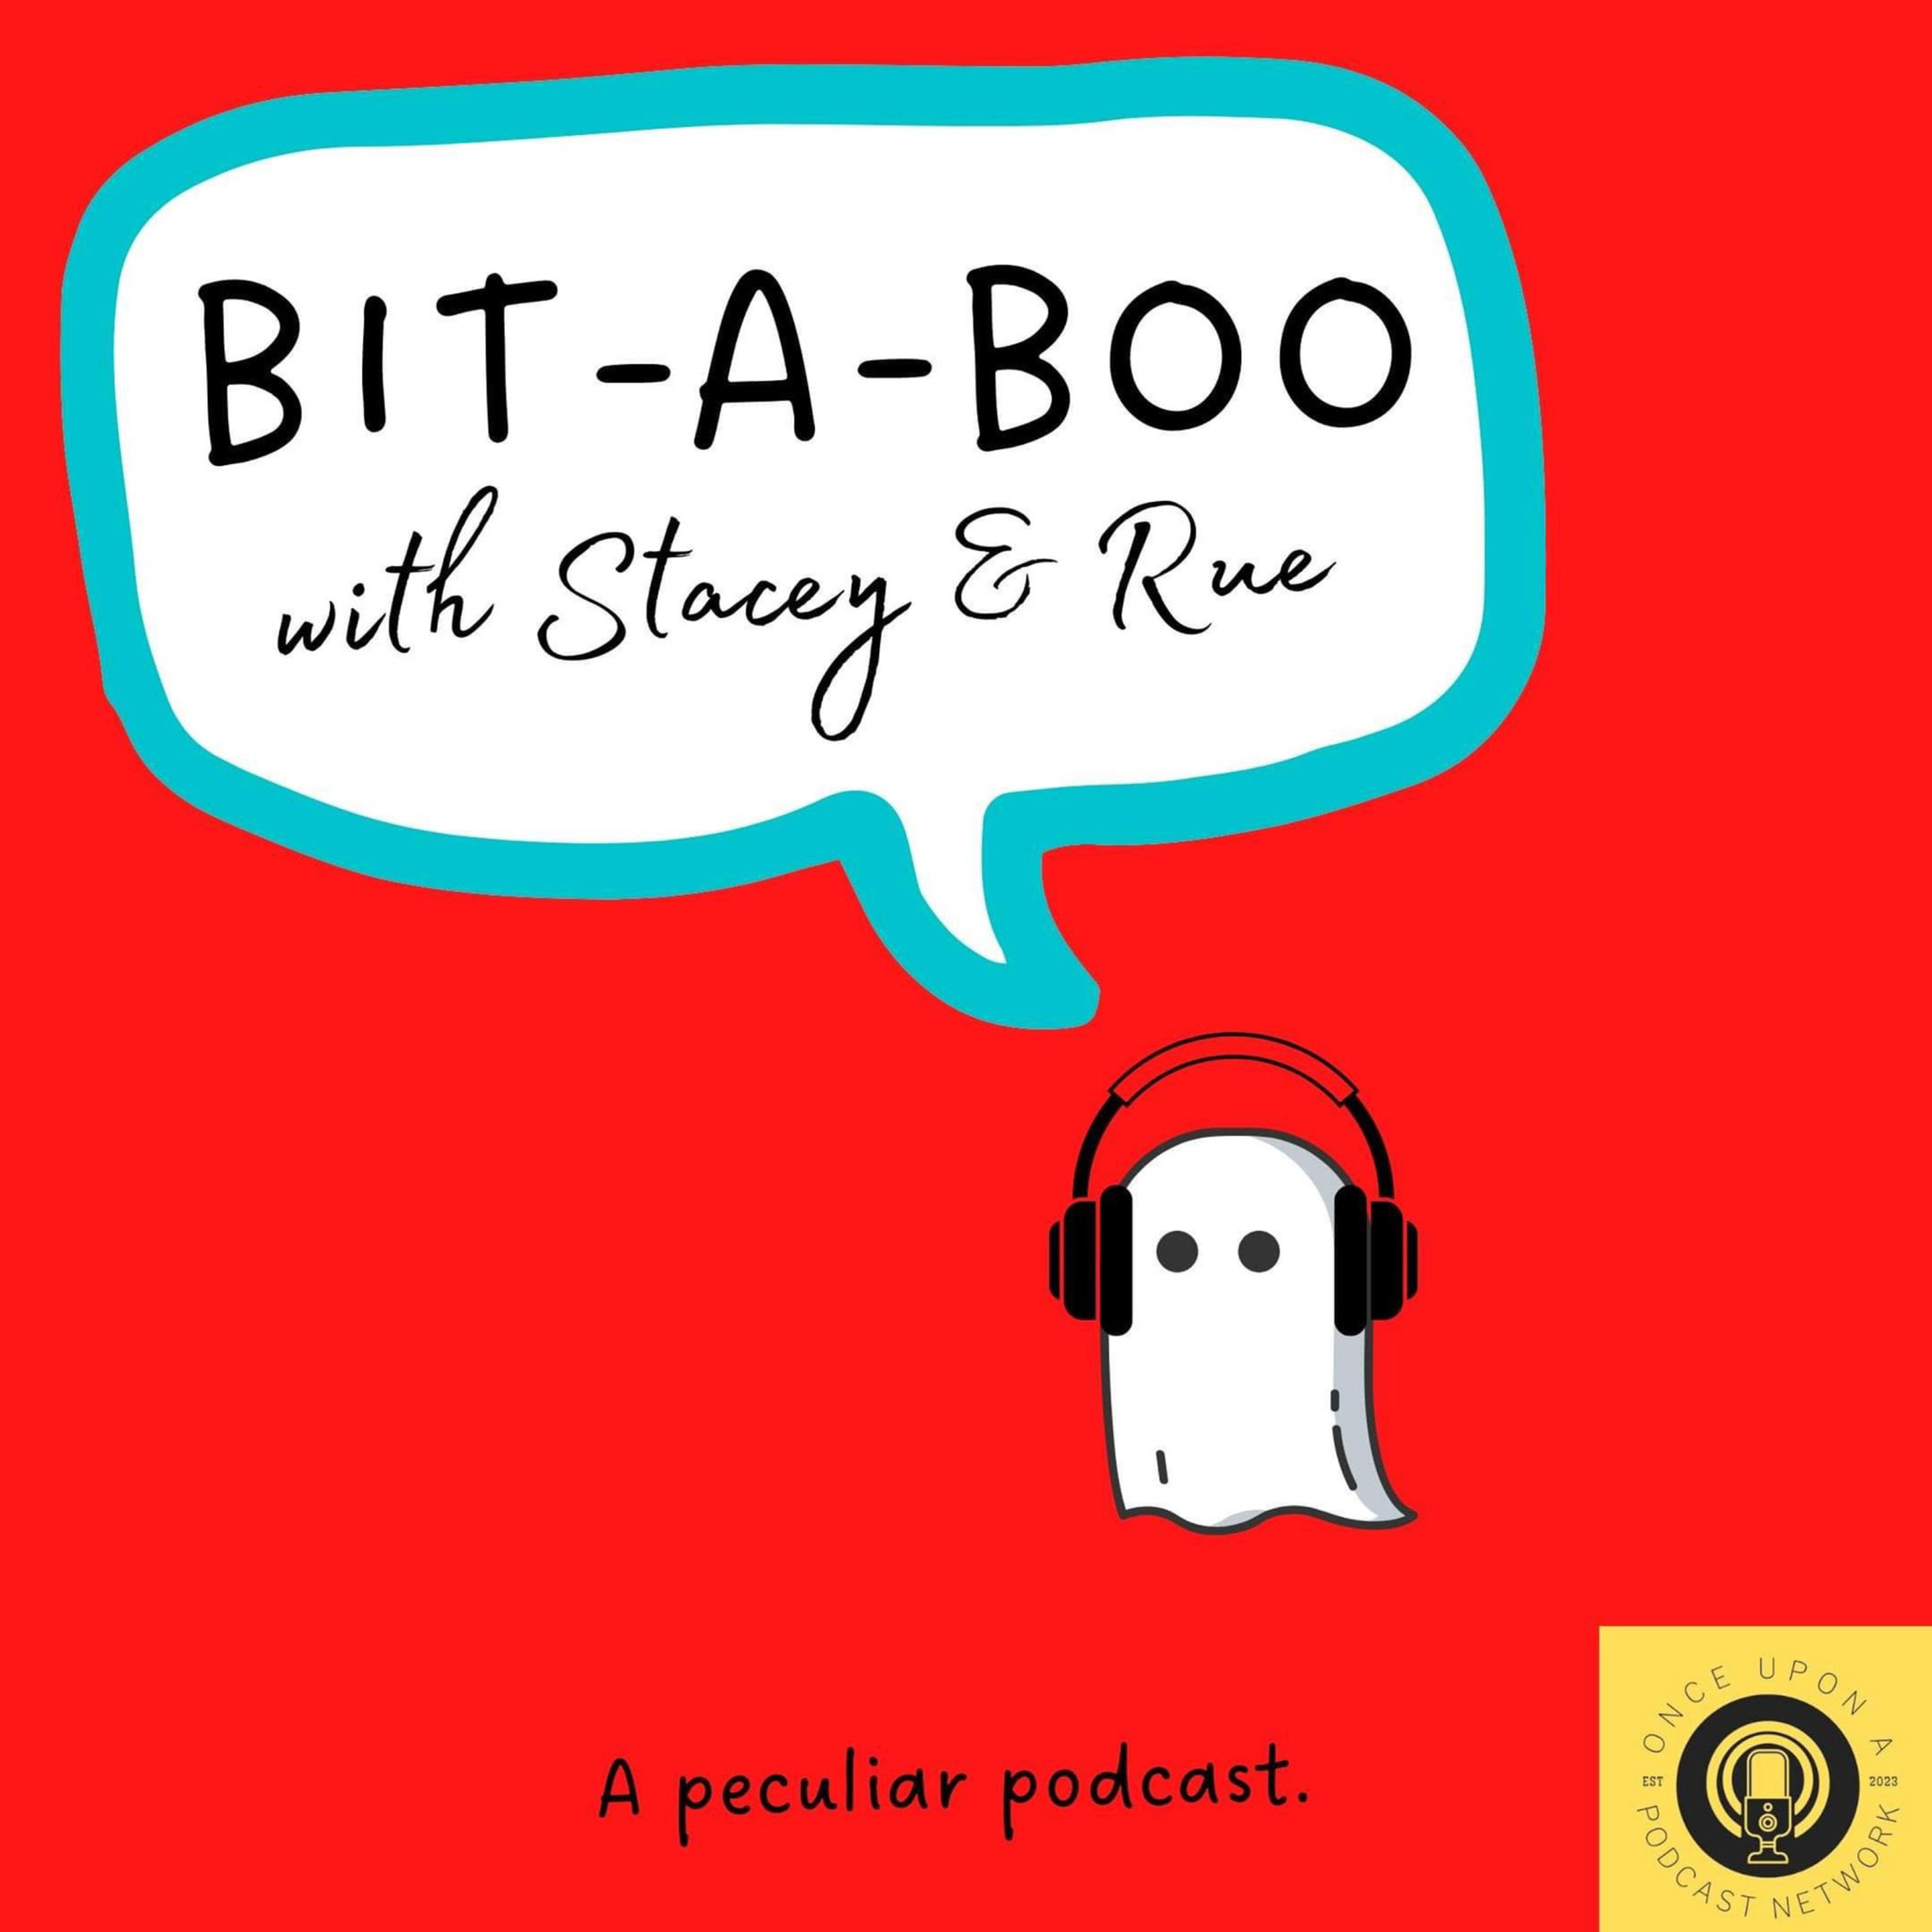 Artwork for podcast Bit A Boo